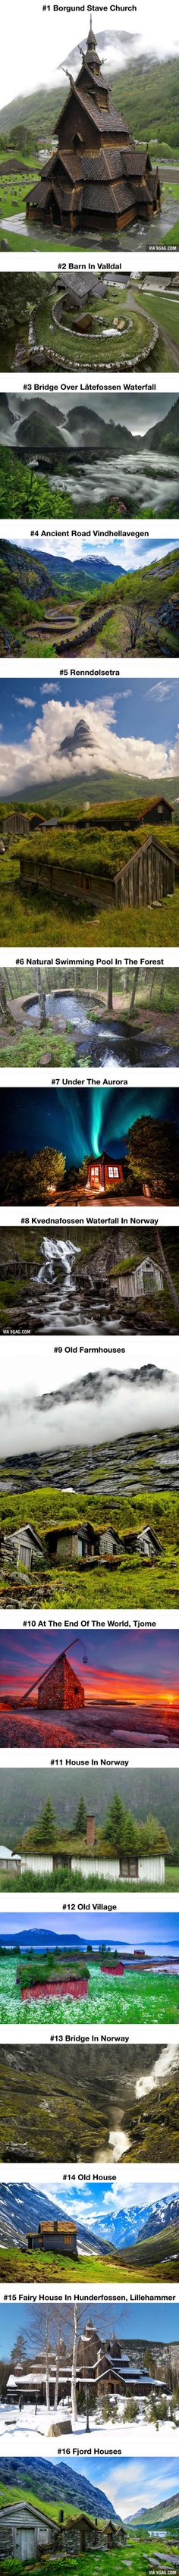 Beautiful Fairy Tale Architecture From Norway Country, Fairy Tales, Places, Wonderland, Oslo, Norway, Adventure, Abandoned Places, Wonders Of The World